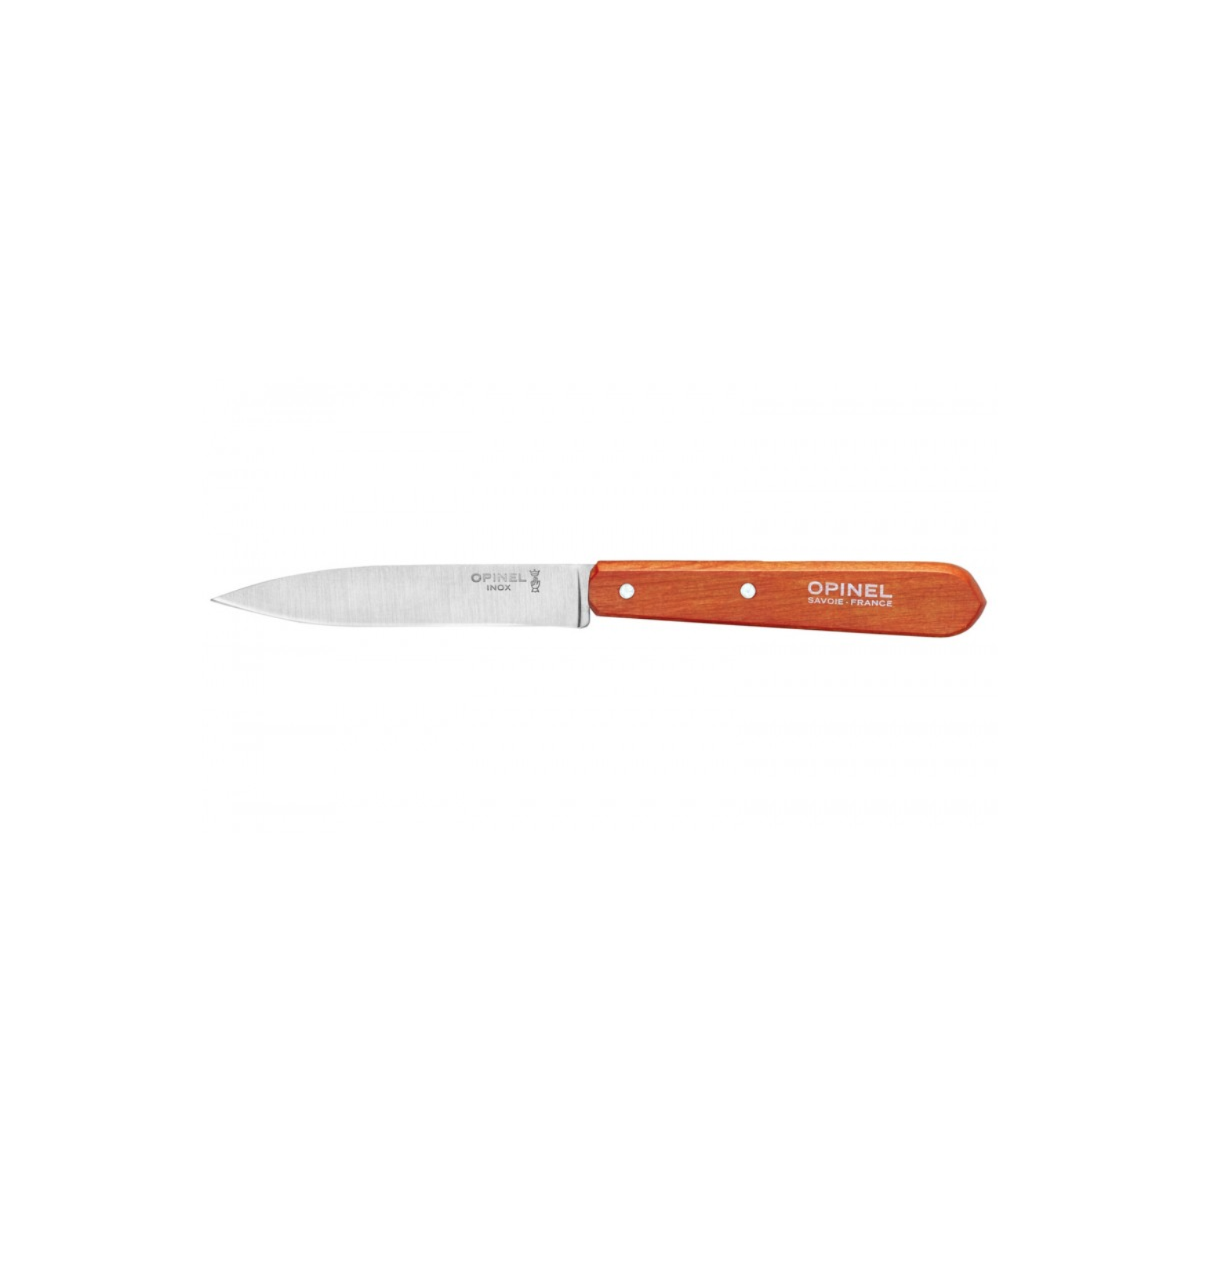 OPINEL 112 COUTEAU D'OFFICE ORANGE INOX HOOD COUPE DECOUPE CUISINE 3123840019166 HOME COOKING KITCHEN NATURE INOX HOOD COMASOUND KARTEL CSK ONLINE